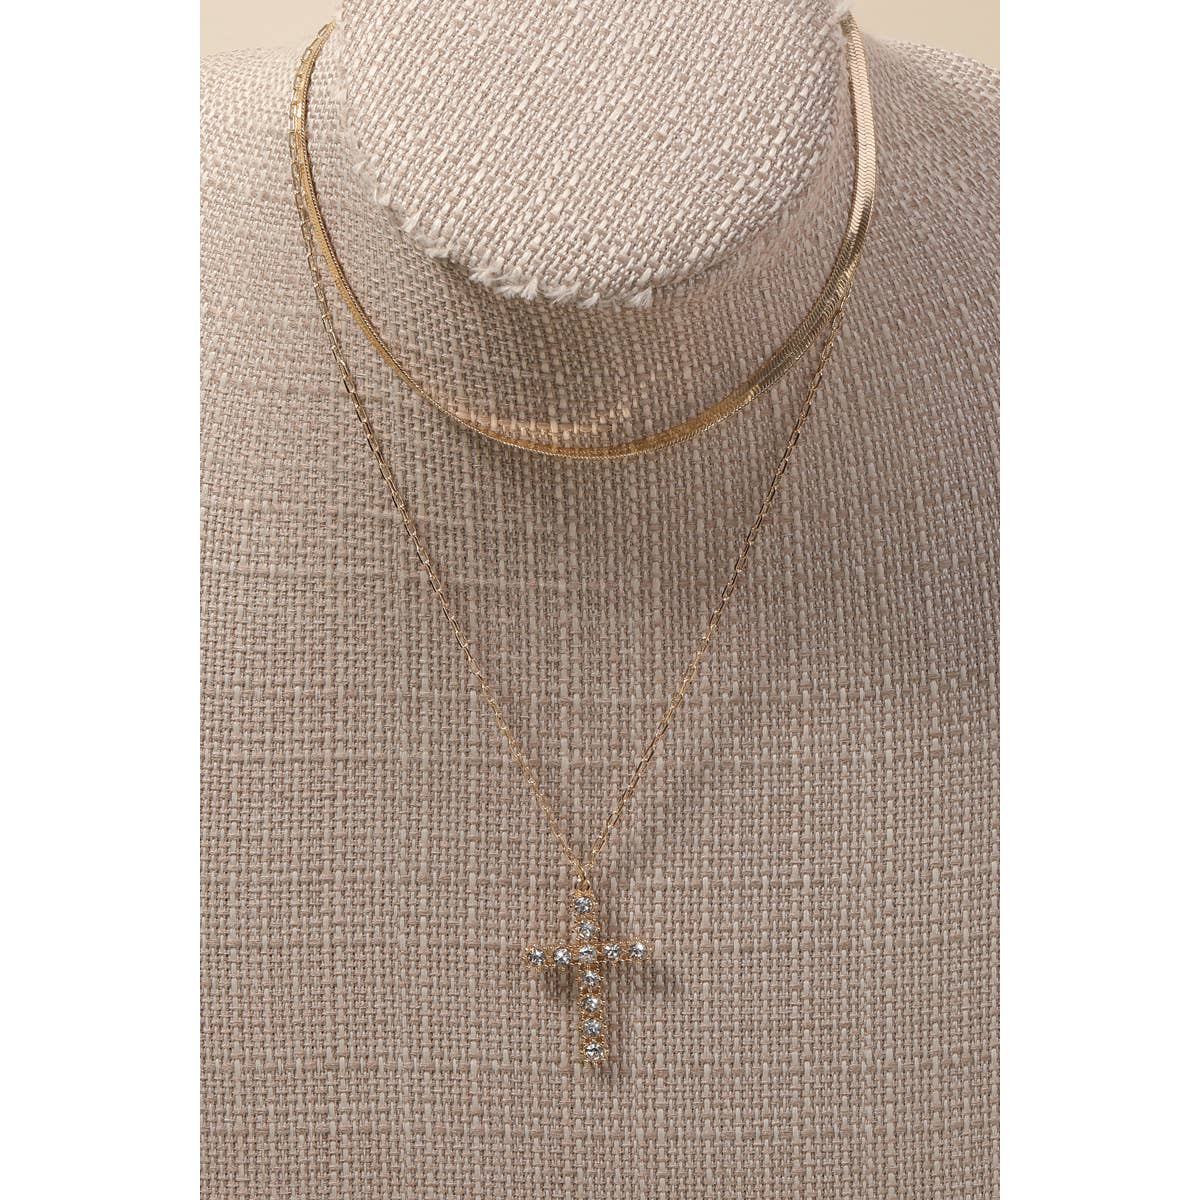 Studded Cross Pendant Layered Chain Necklace